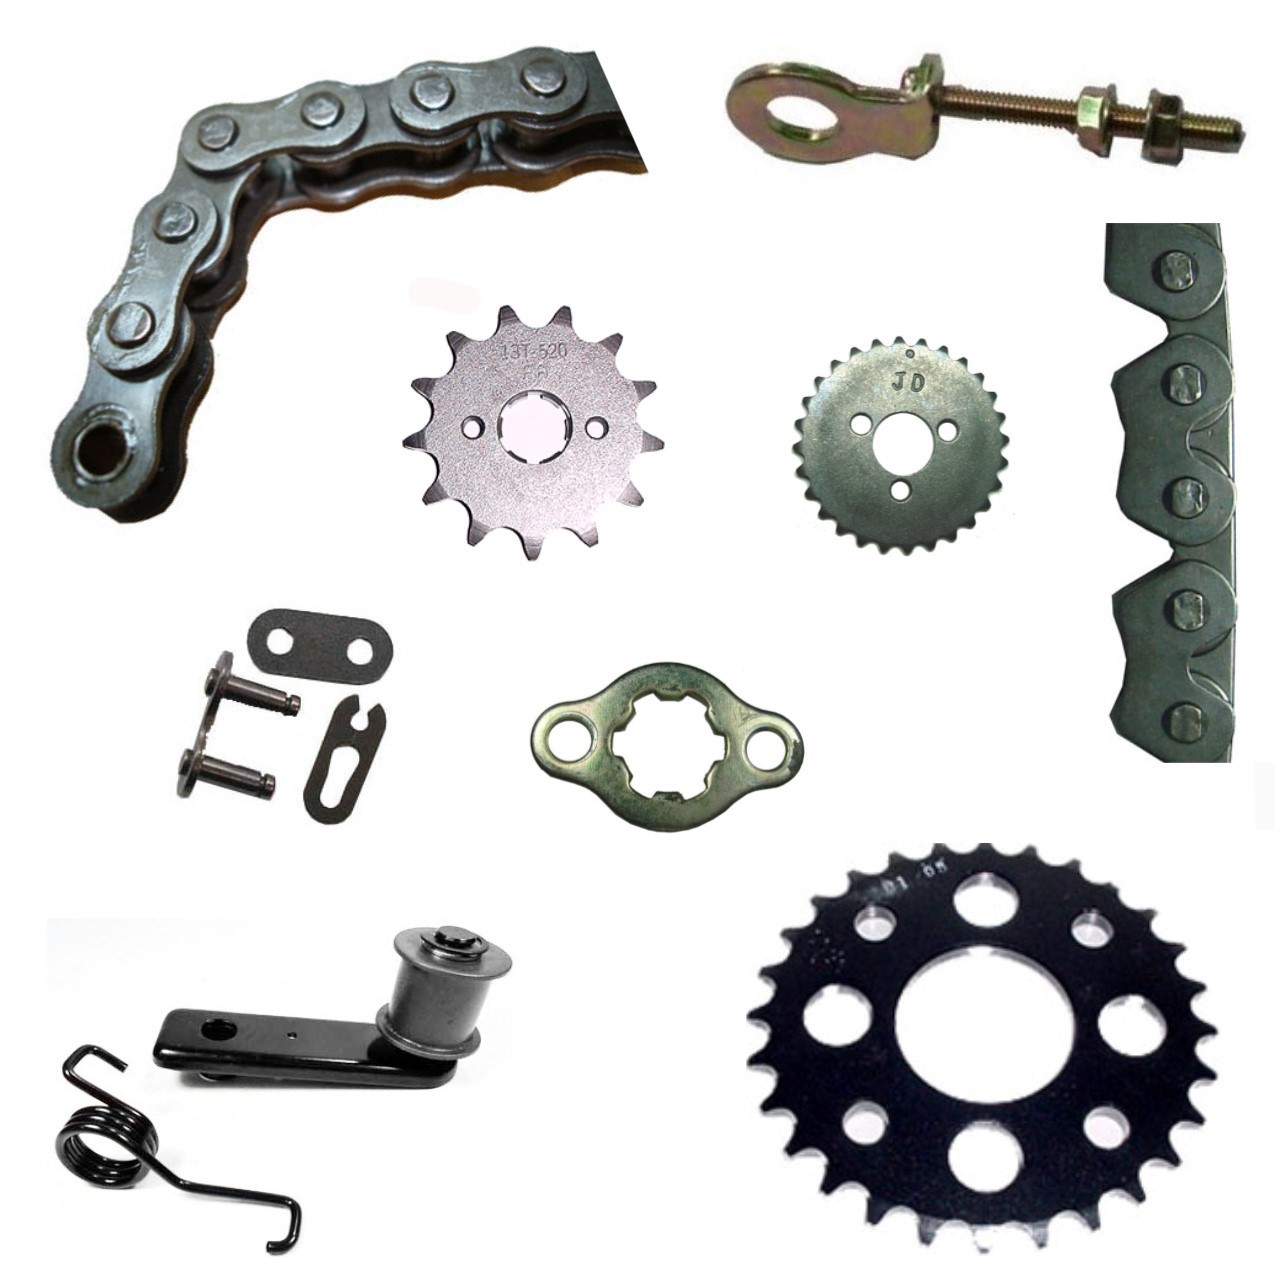 Chains - Internal and External Sprockets - Master Links - Adjusters